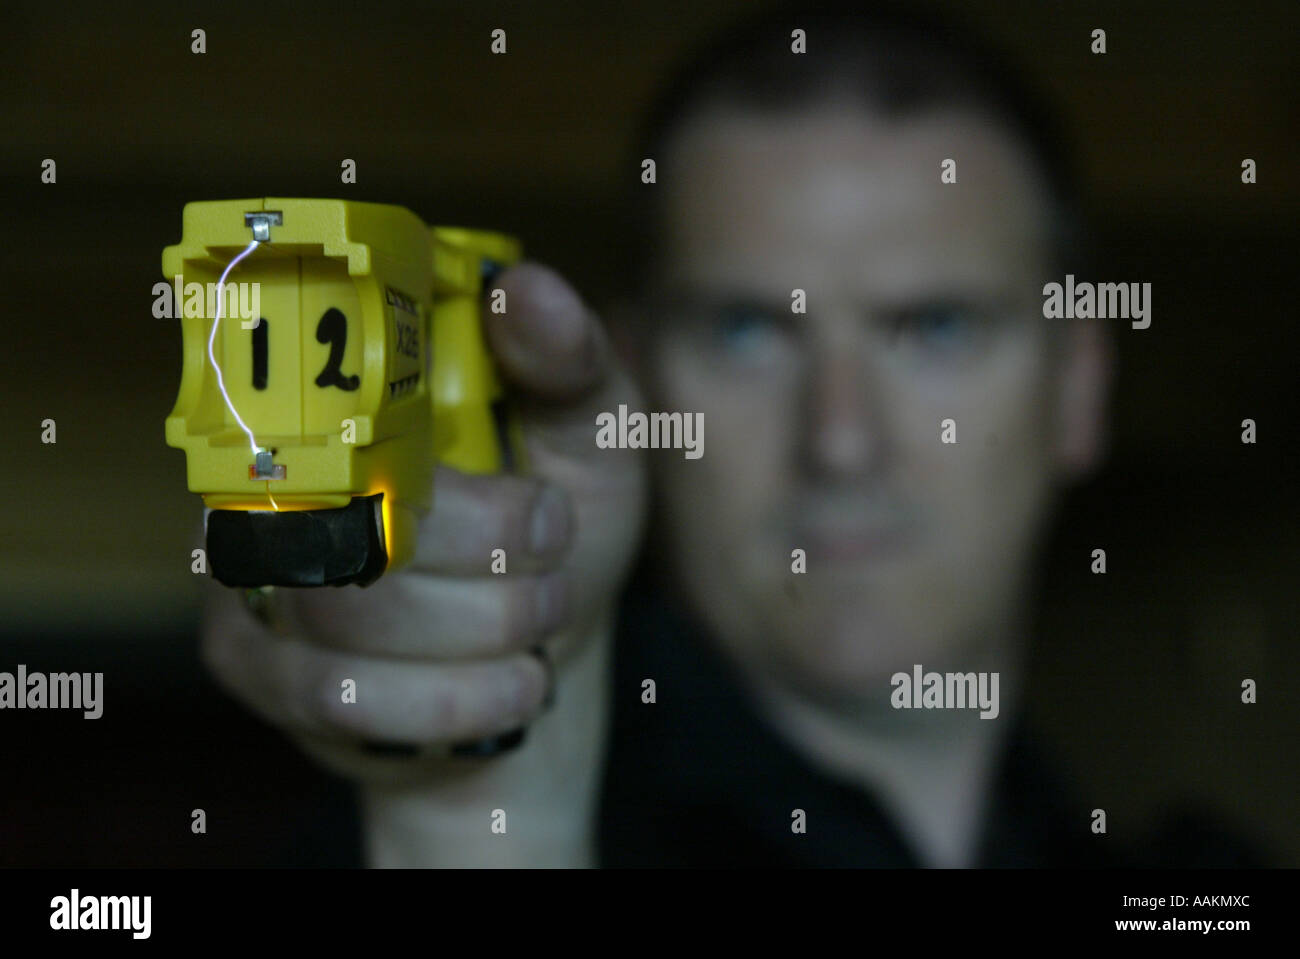 A MAN DEMONSTRATES A TASER STUN GUN USED BY POLICE IN THE UK Stock Photo